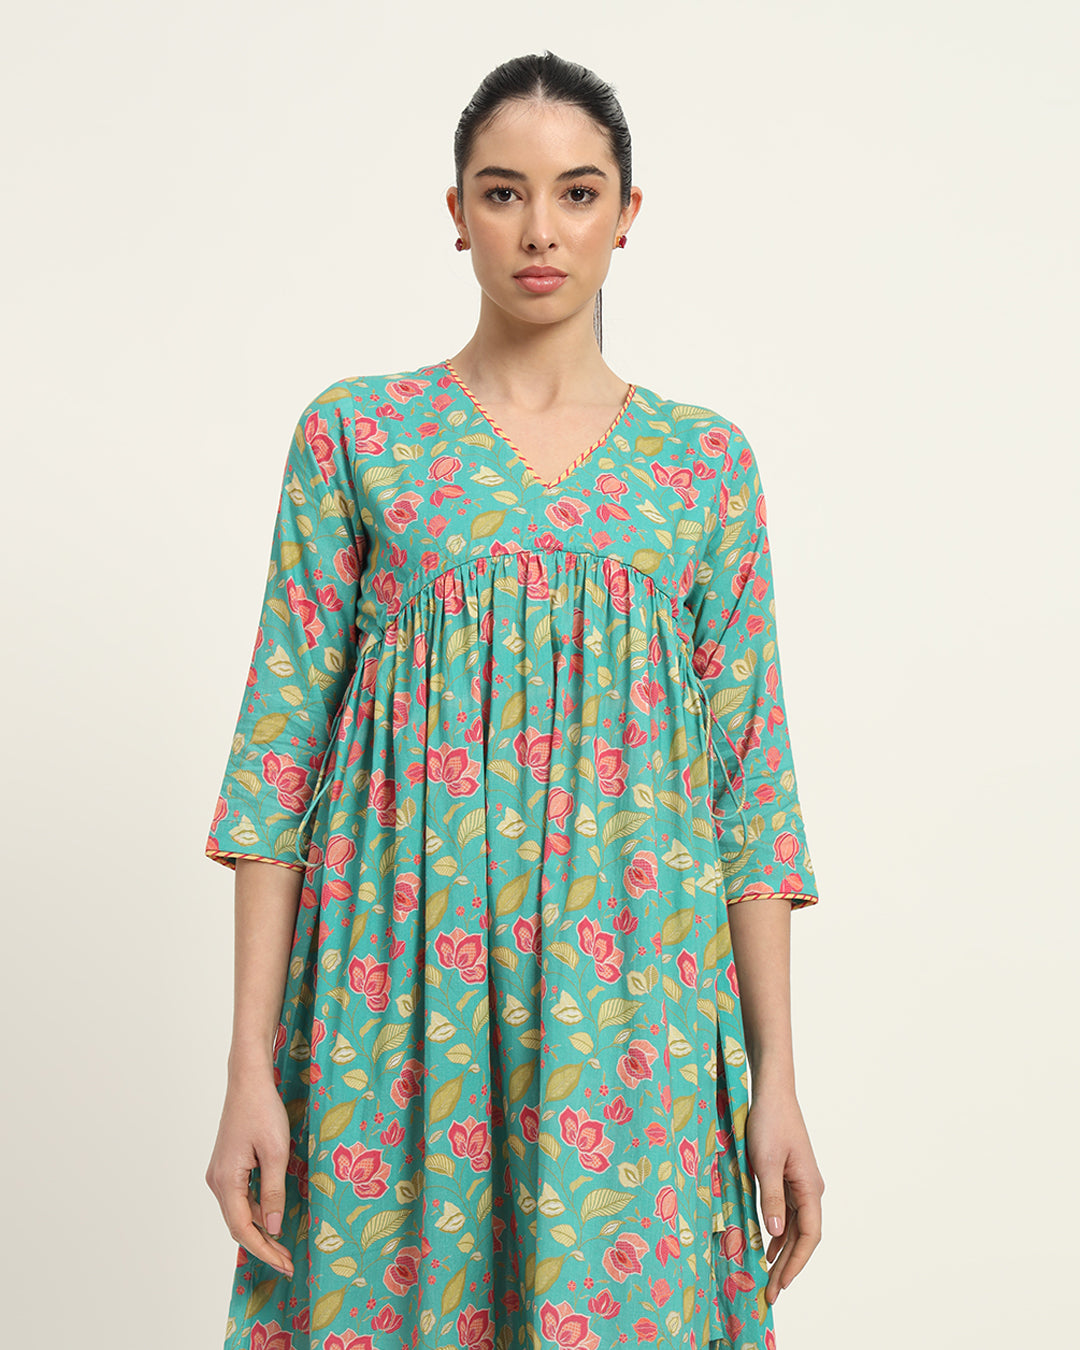 Whispers in the Breeze V Neck Dress